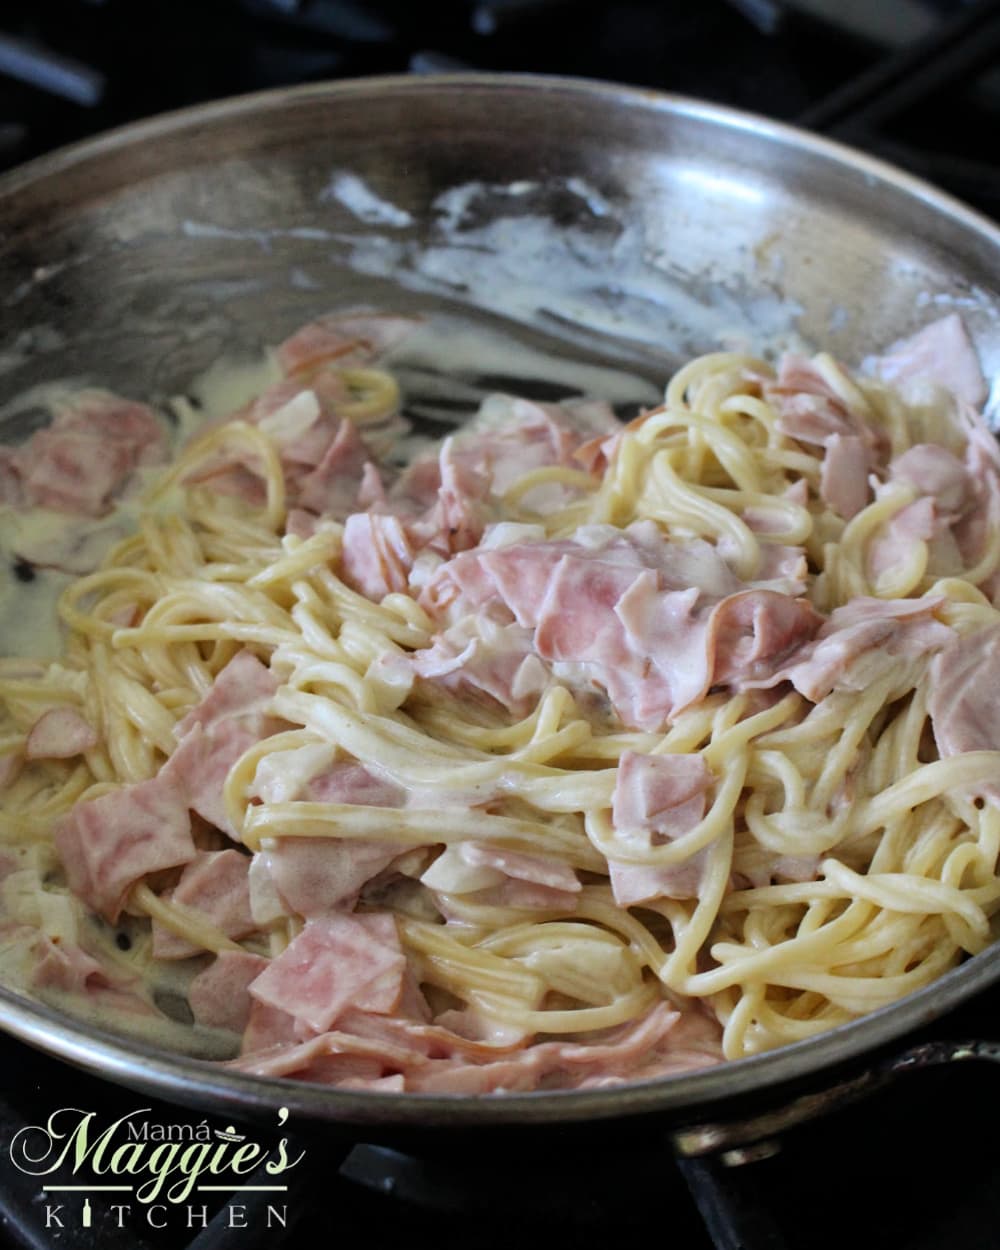 Cooked spaghetti added to the skillet and mixed with the ham and cream sauce.